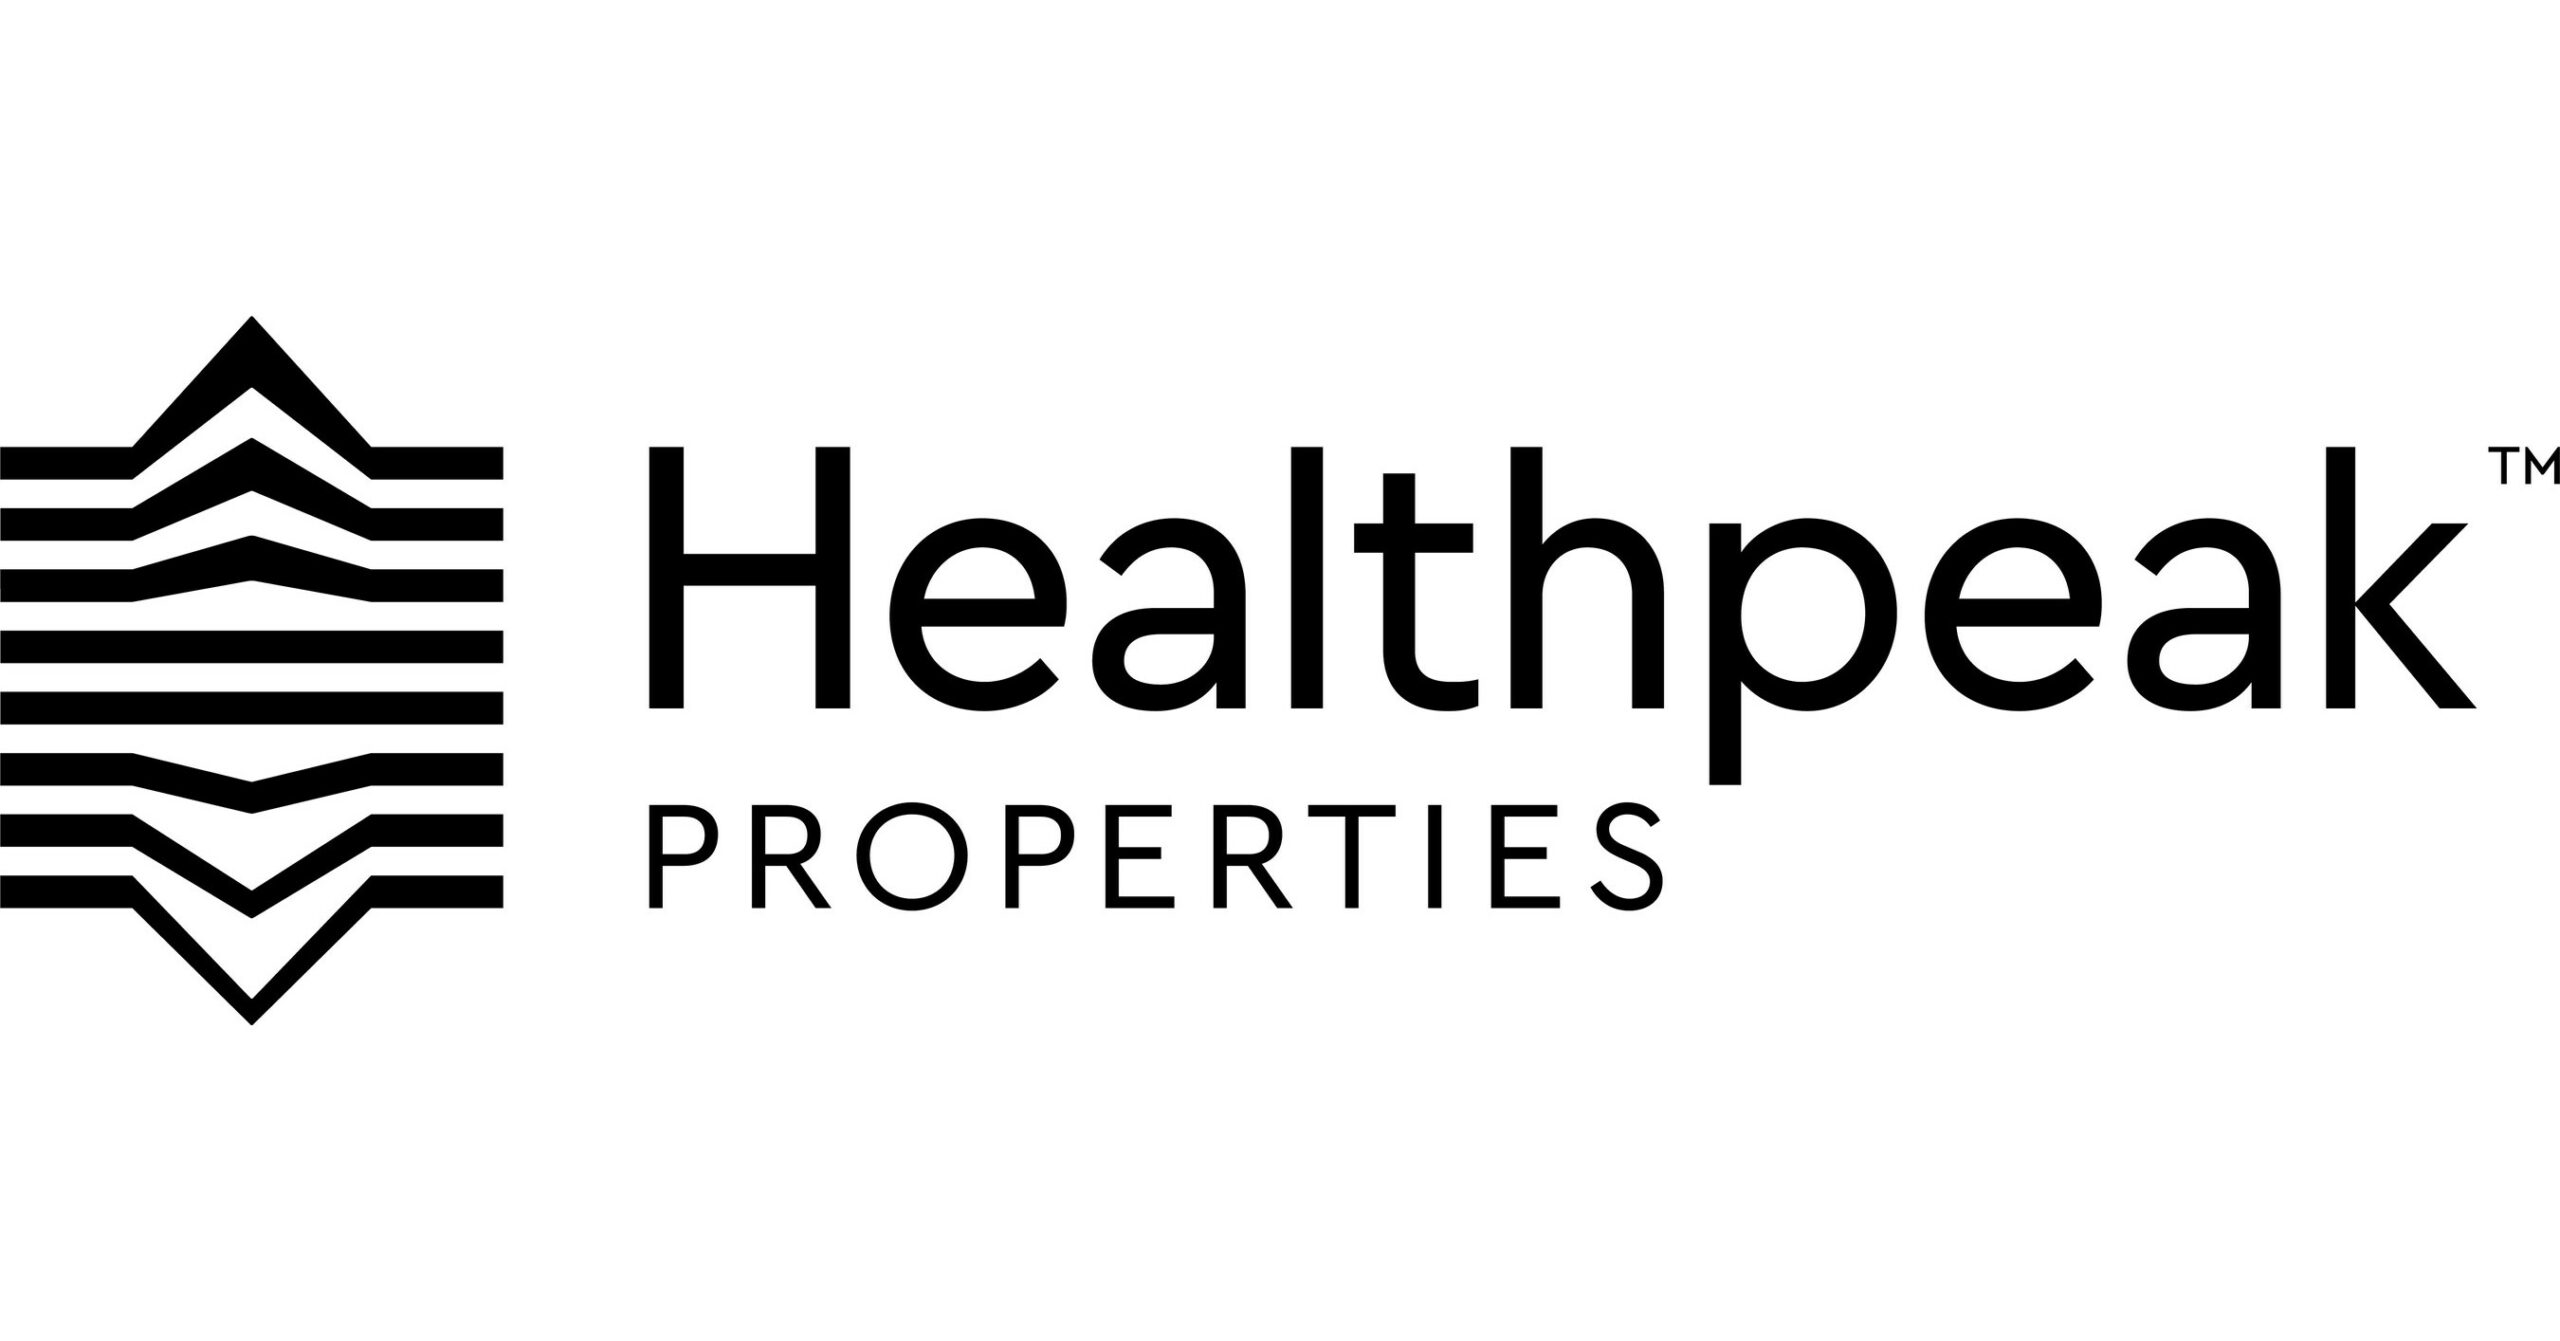 Healthpeak Properties Finalizes Merger with Physicians Realty Trust